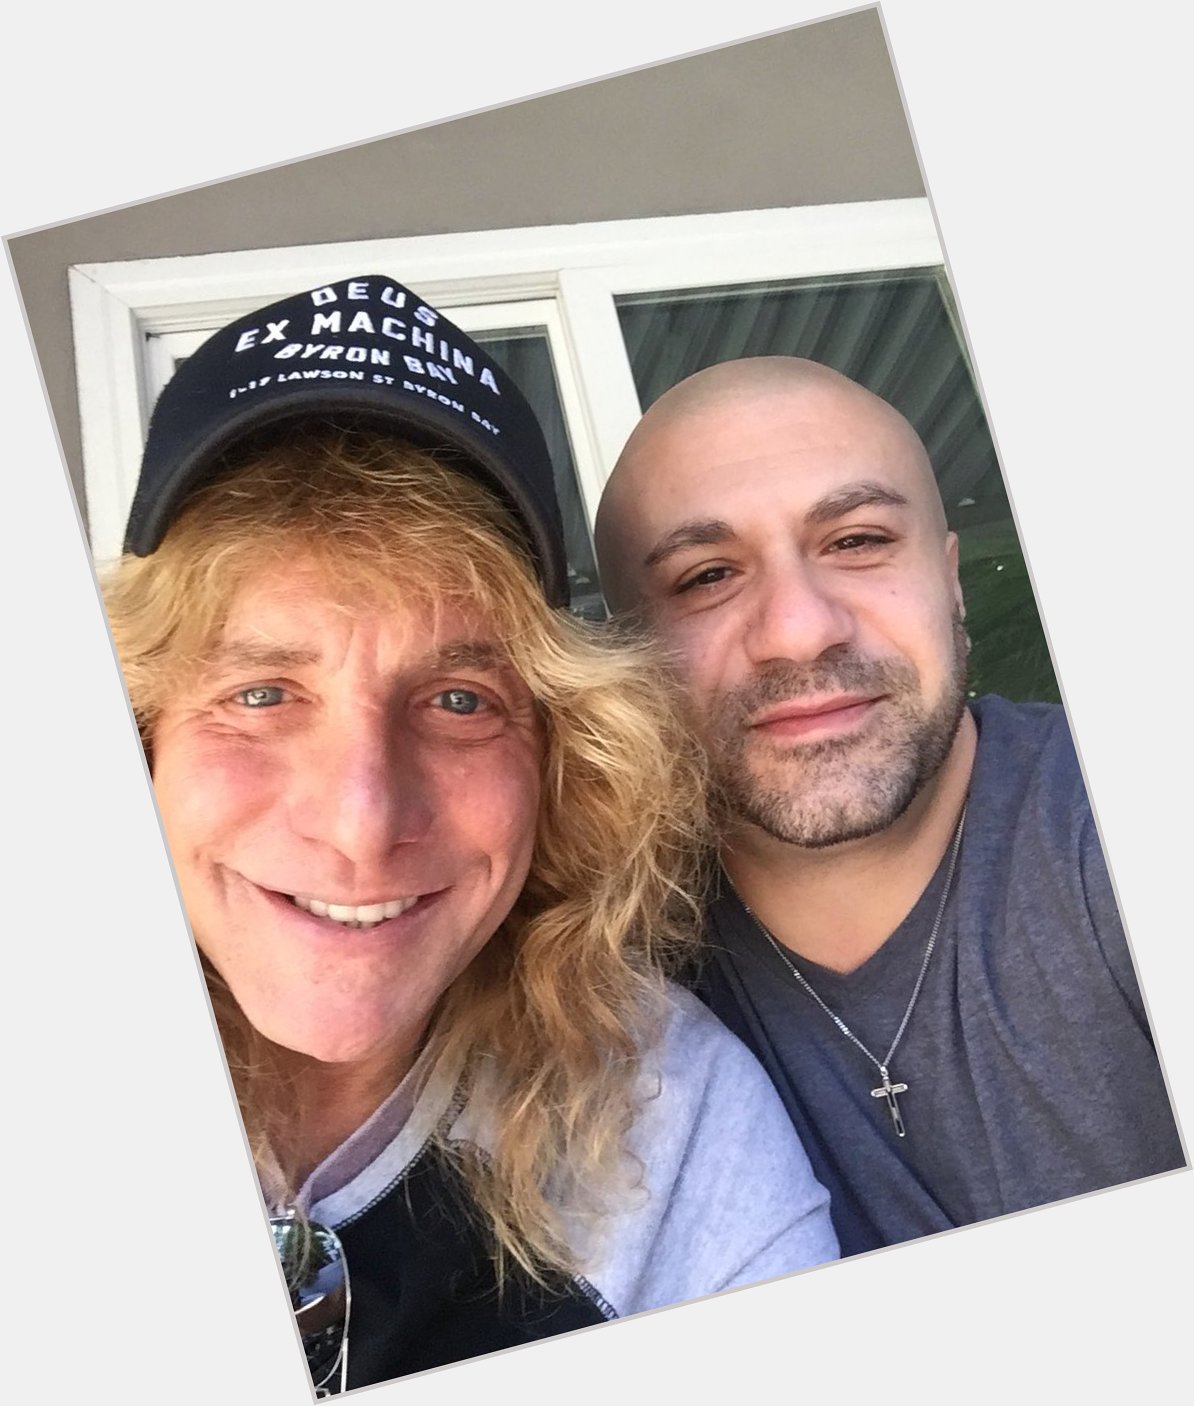 Happy Birthday to my brooooo Steven Adler from Guns N Roses!!! Hope you have a blessed day! Rock on dude  